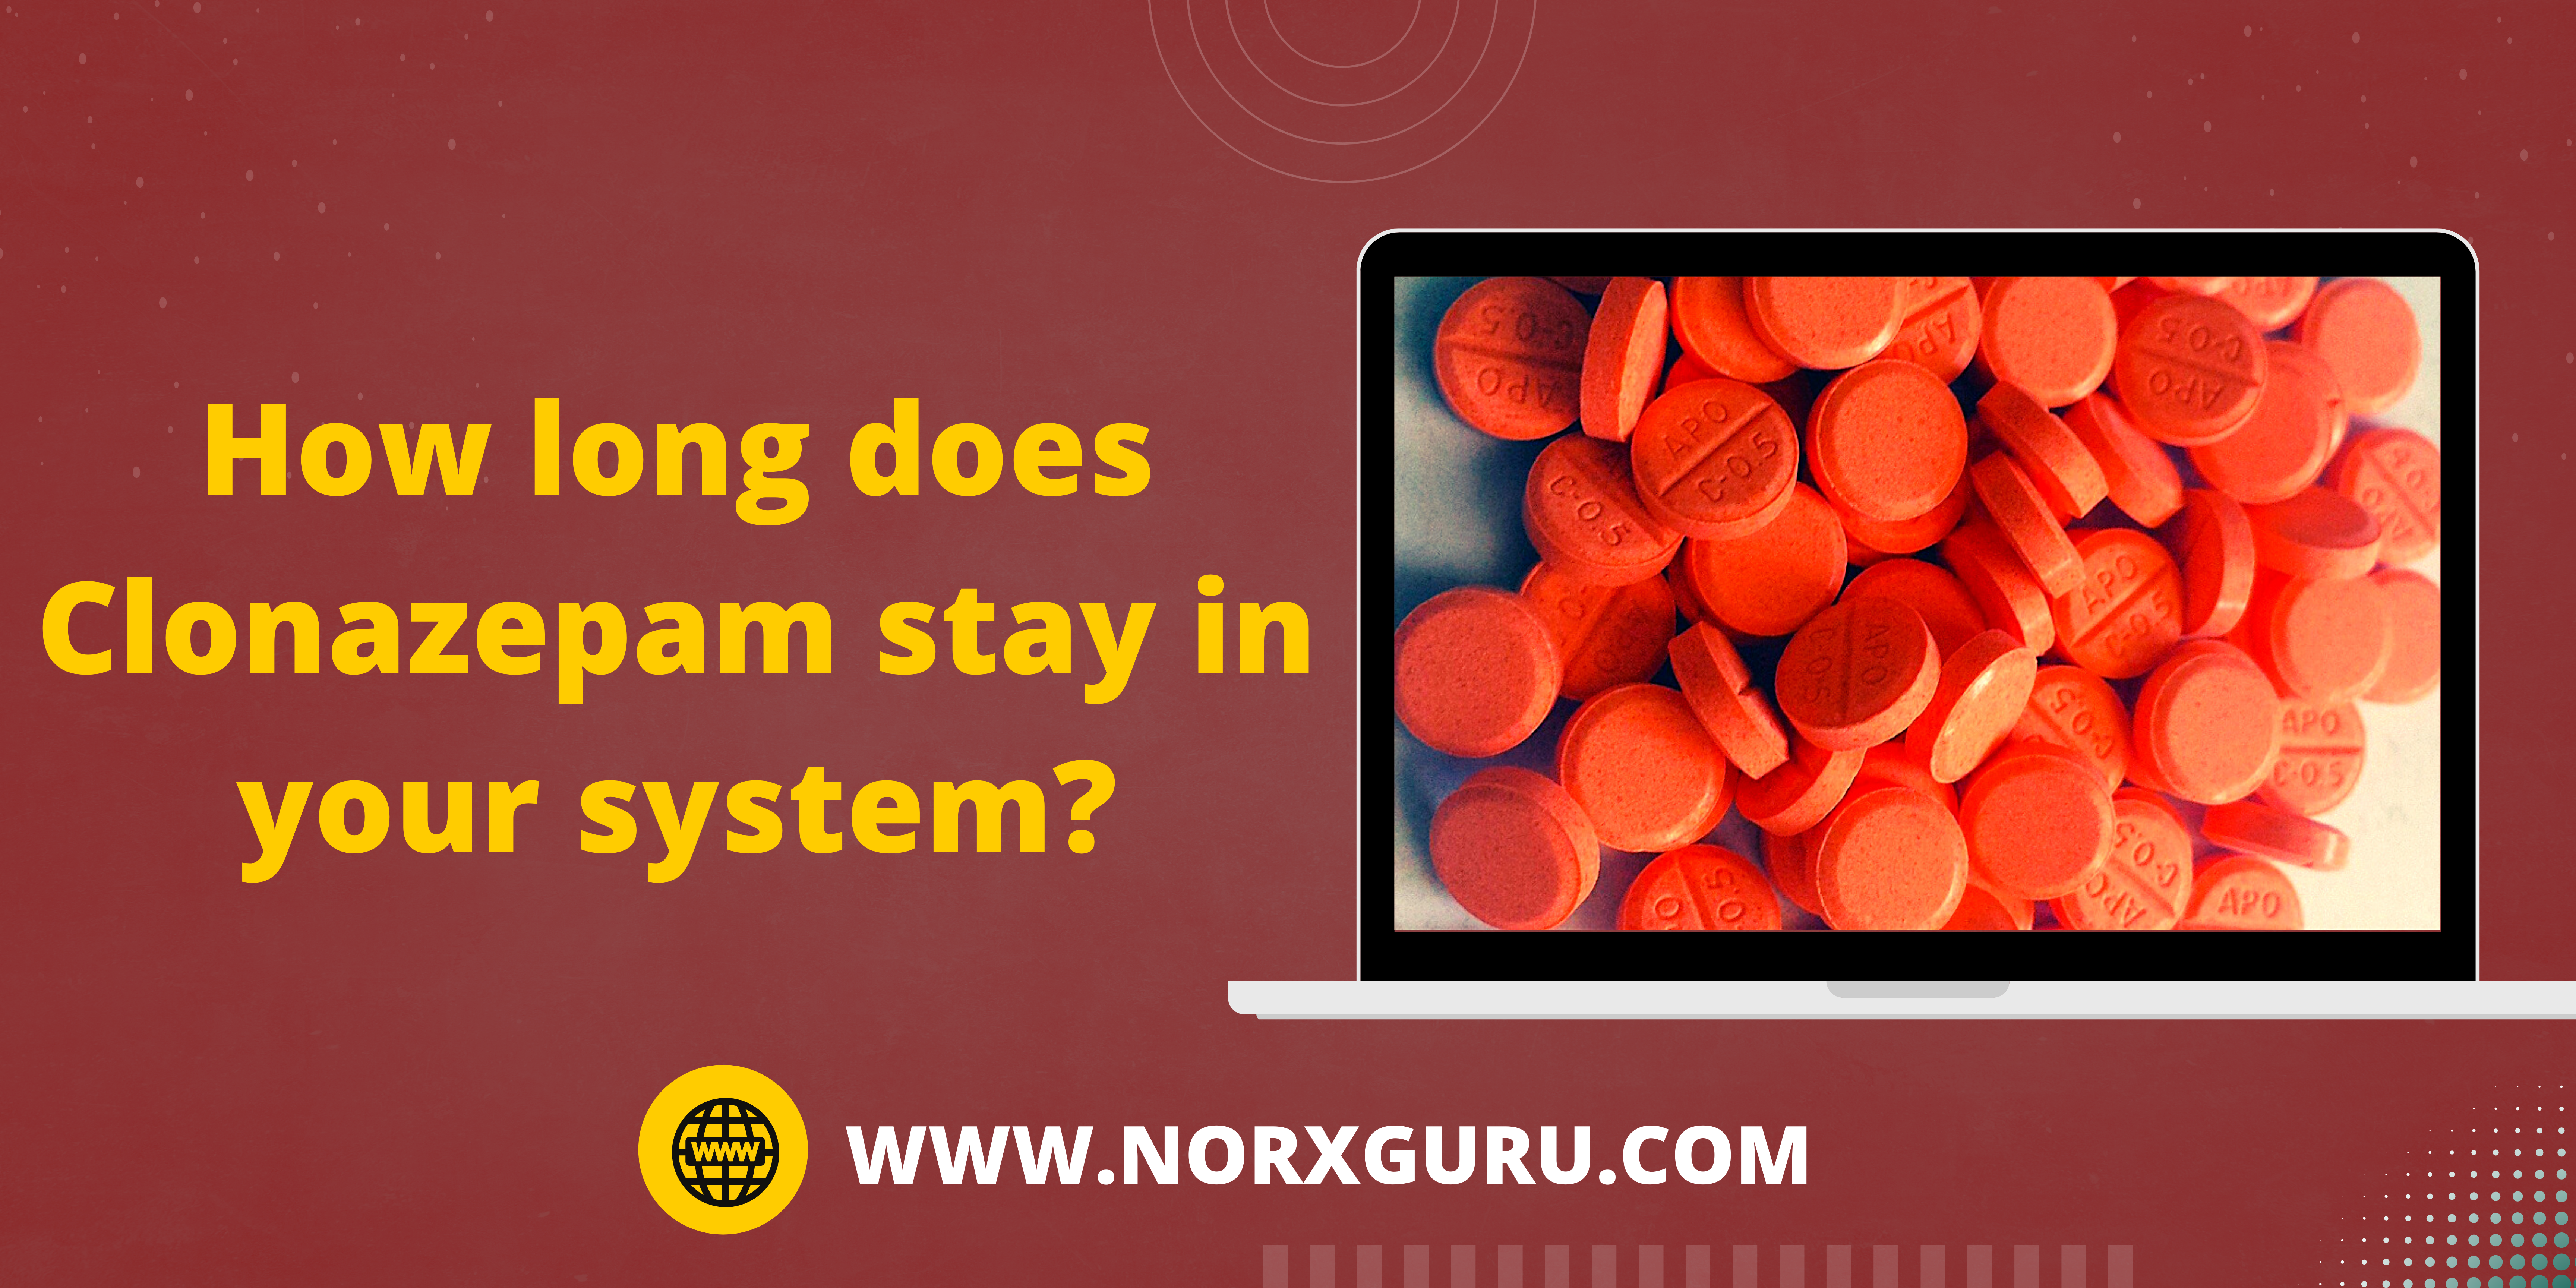 How long does Clonazepam stay in your system?